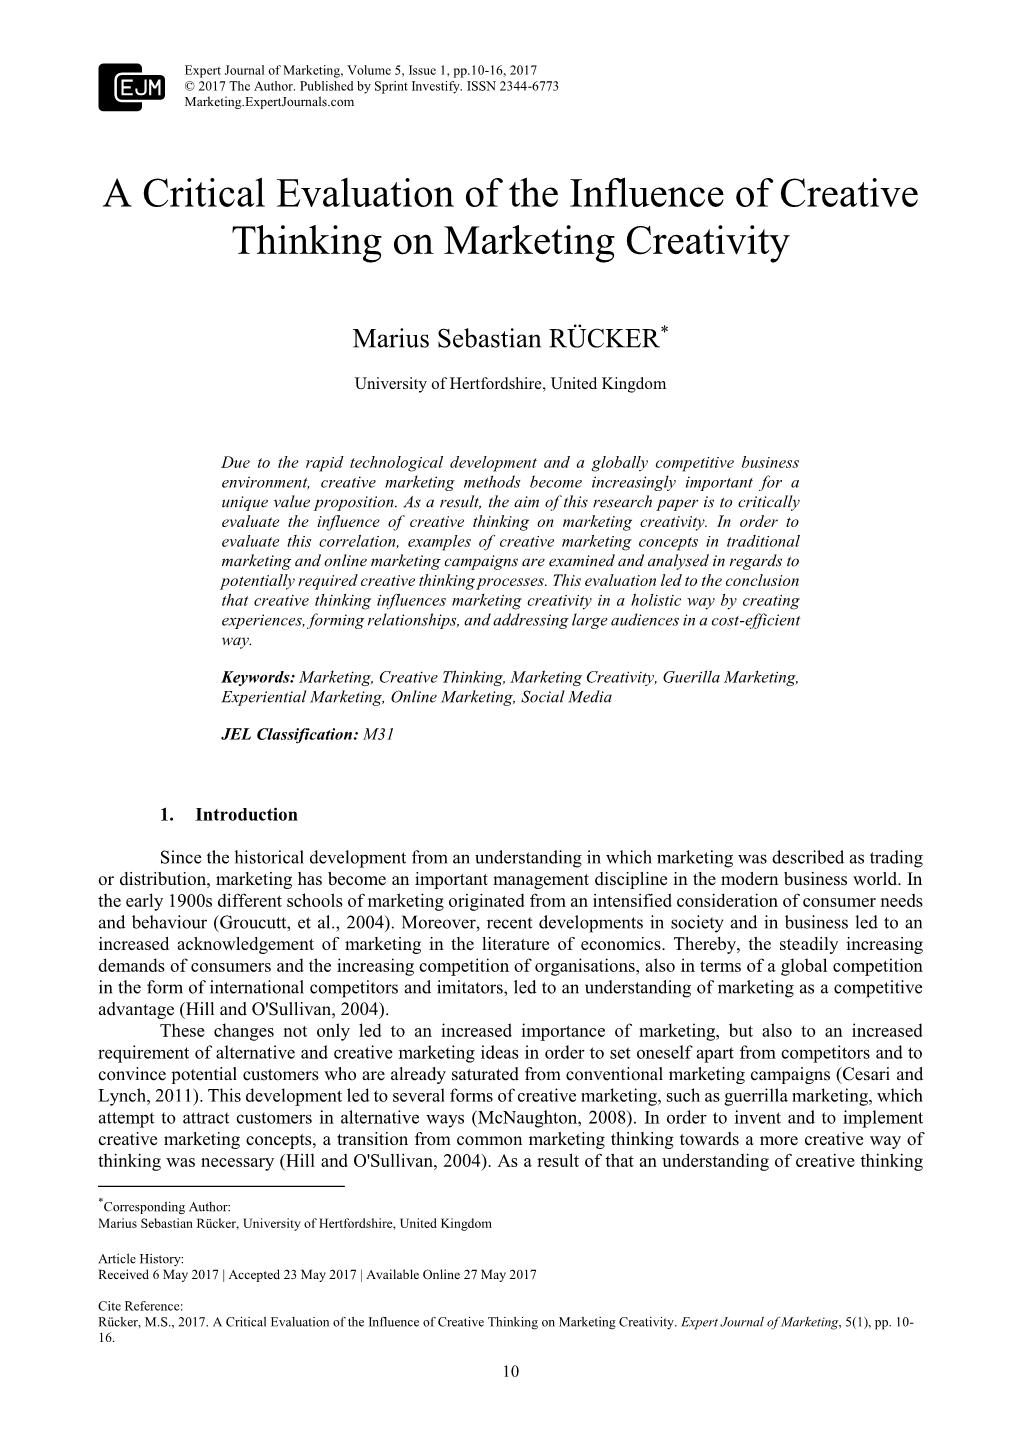 A Critical Evaluation of the Influence of Creative Thinking on Marketing Creativity